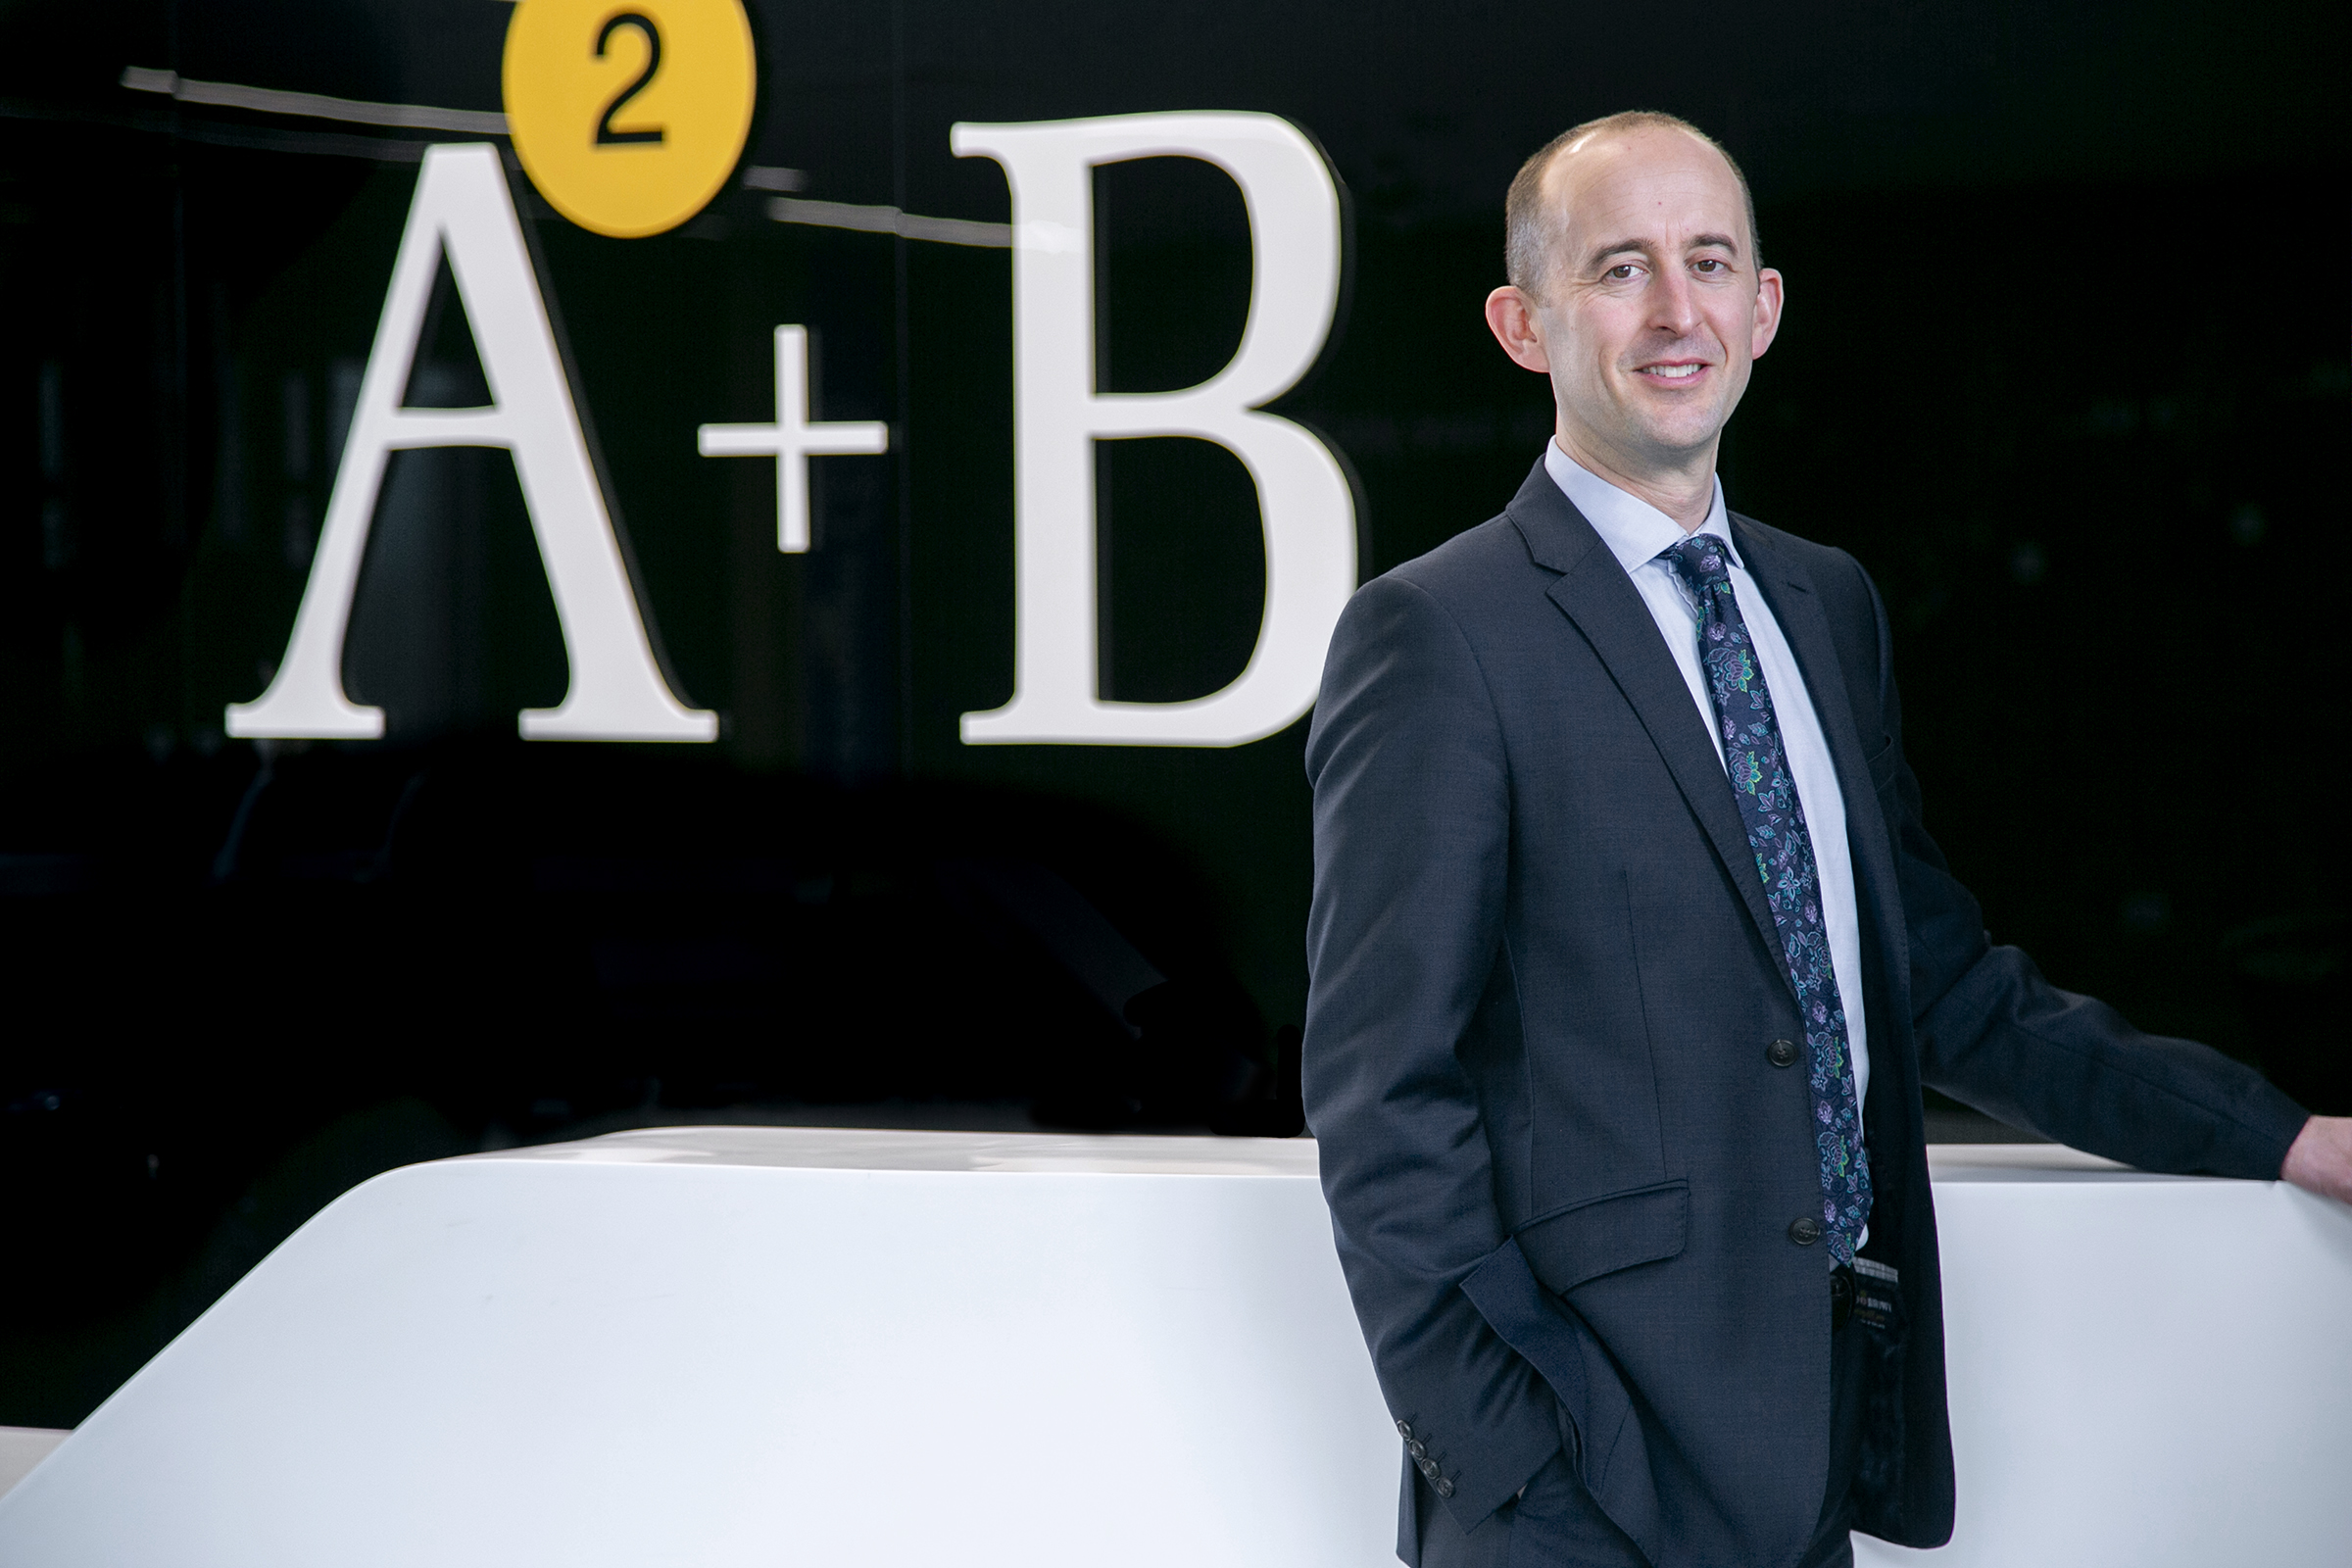 AAB reports quarterly energy technology deals worth more than £5.5m